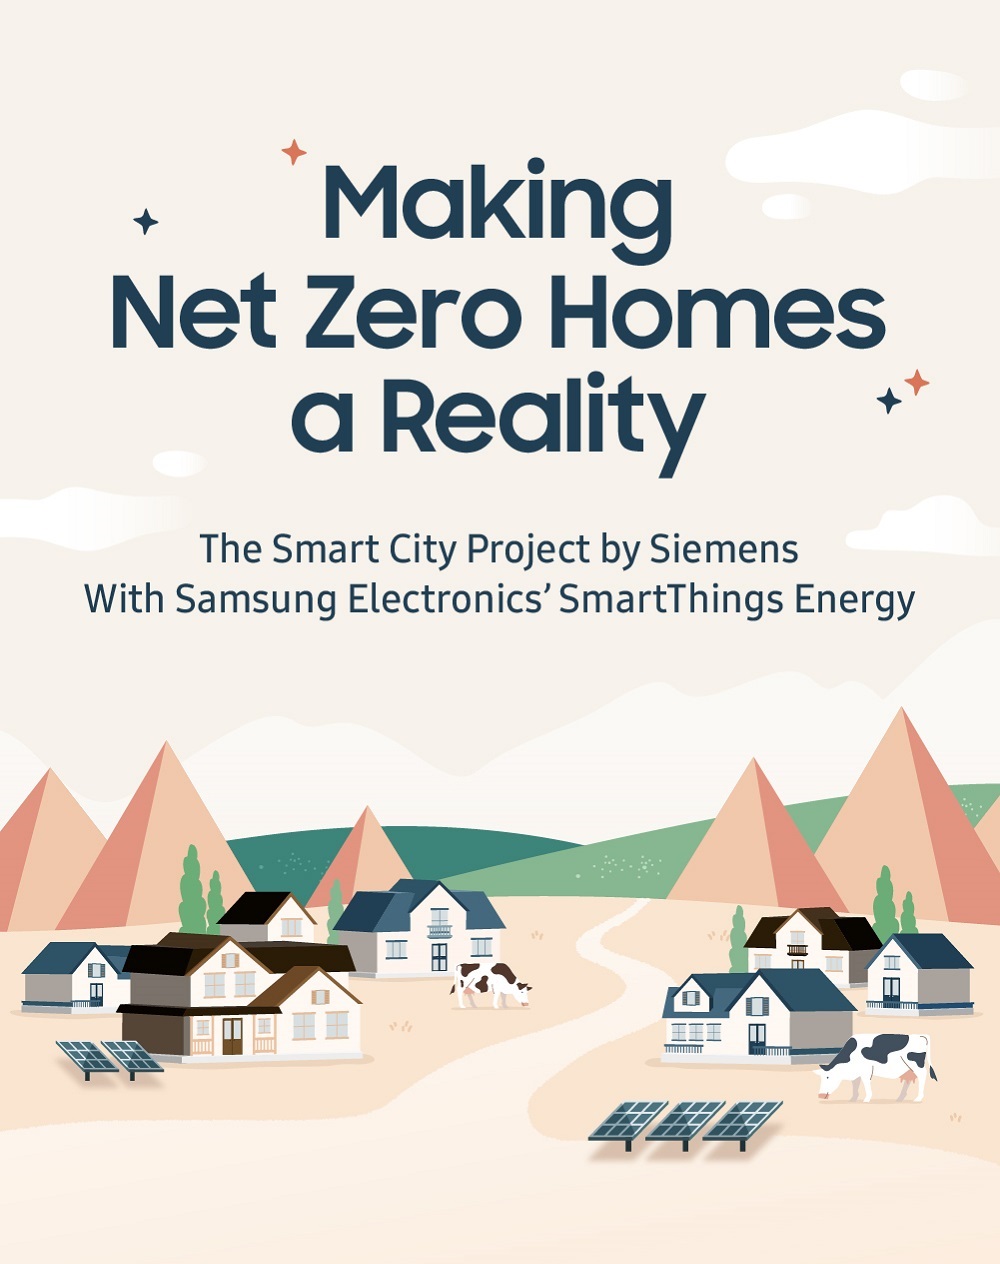 Samsung shows how it designed Smart City housing with Siemens in the US